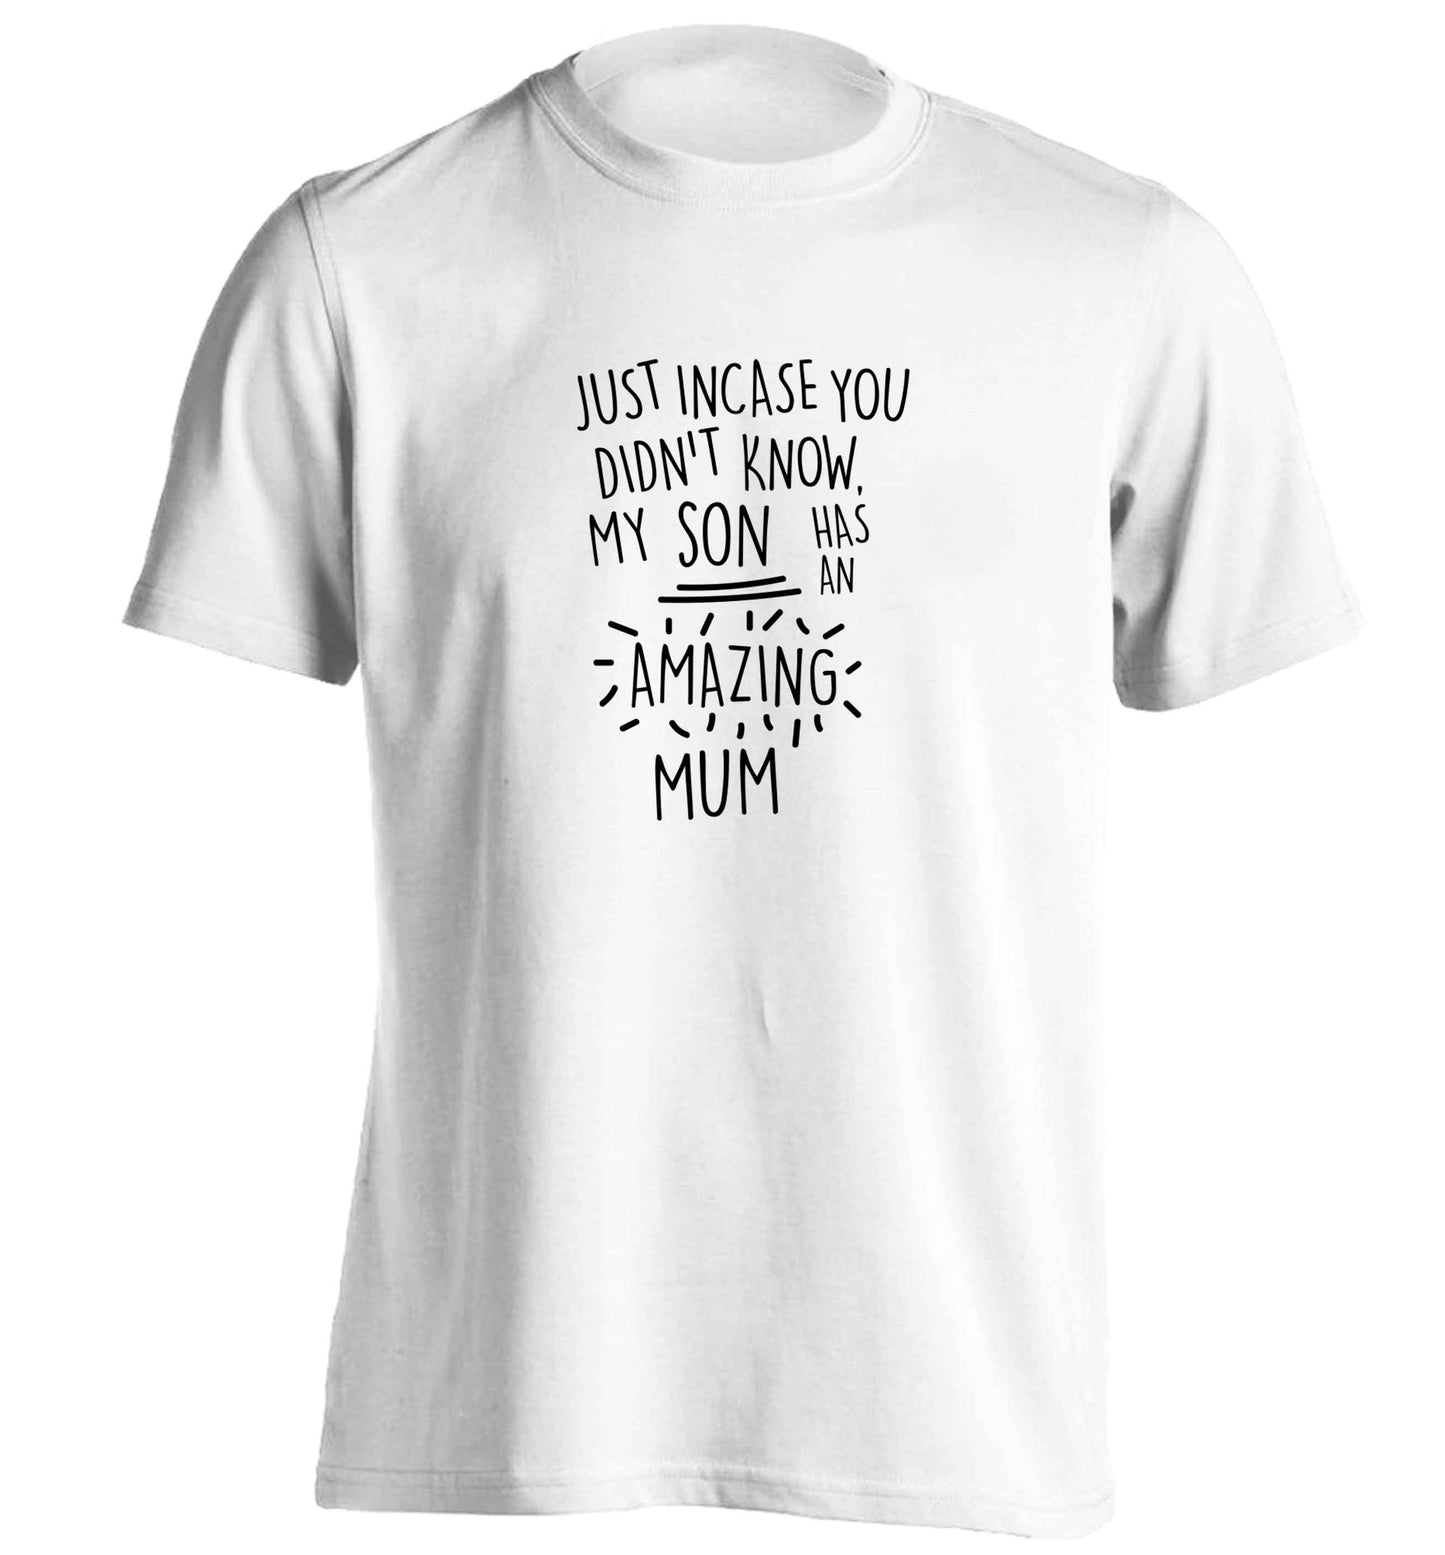 Just incase you didn't know my son has an amazing mum adults unisex white Tshirt 2XL